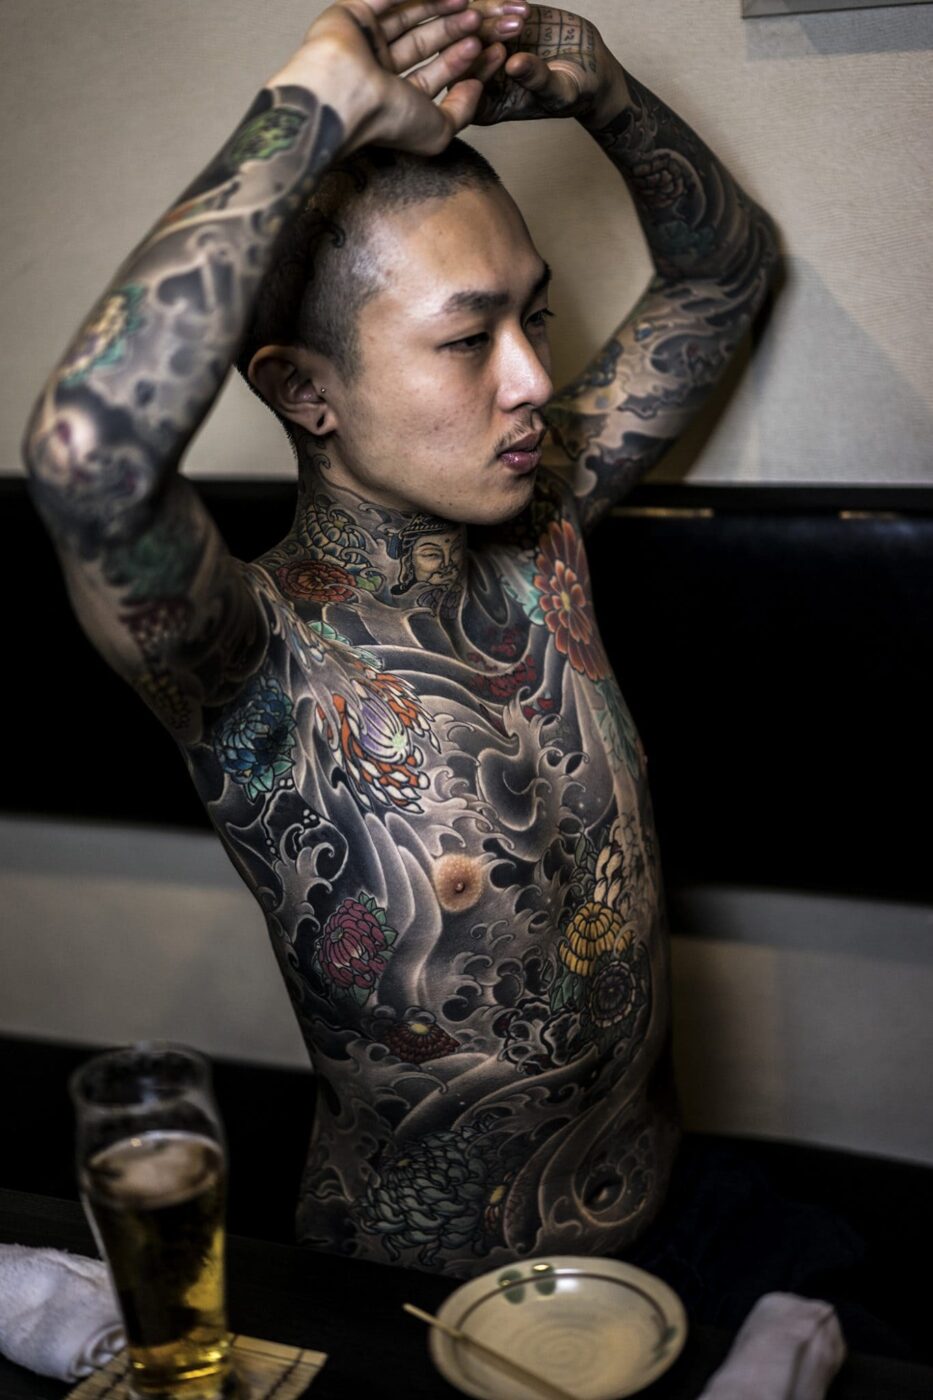 Young Japanese Man Exposing His Tattoos In A Japanese Bar, he is shirtless and has his arms raised above his head, his whole torso is covered in elaborate tattoos